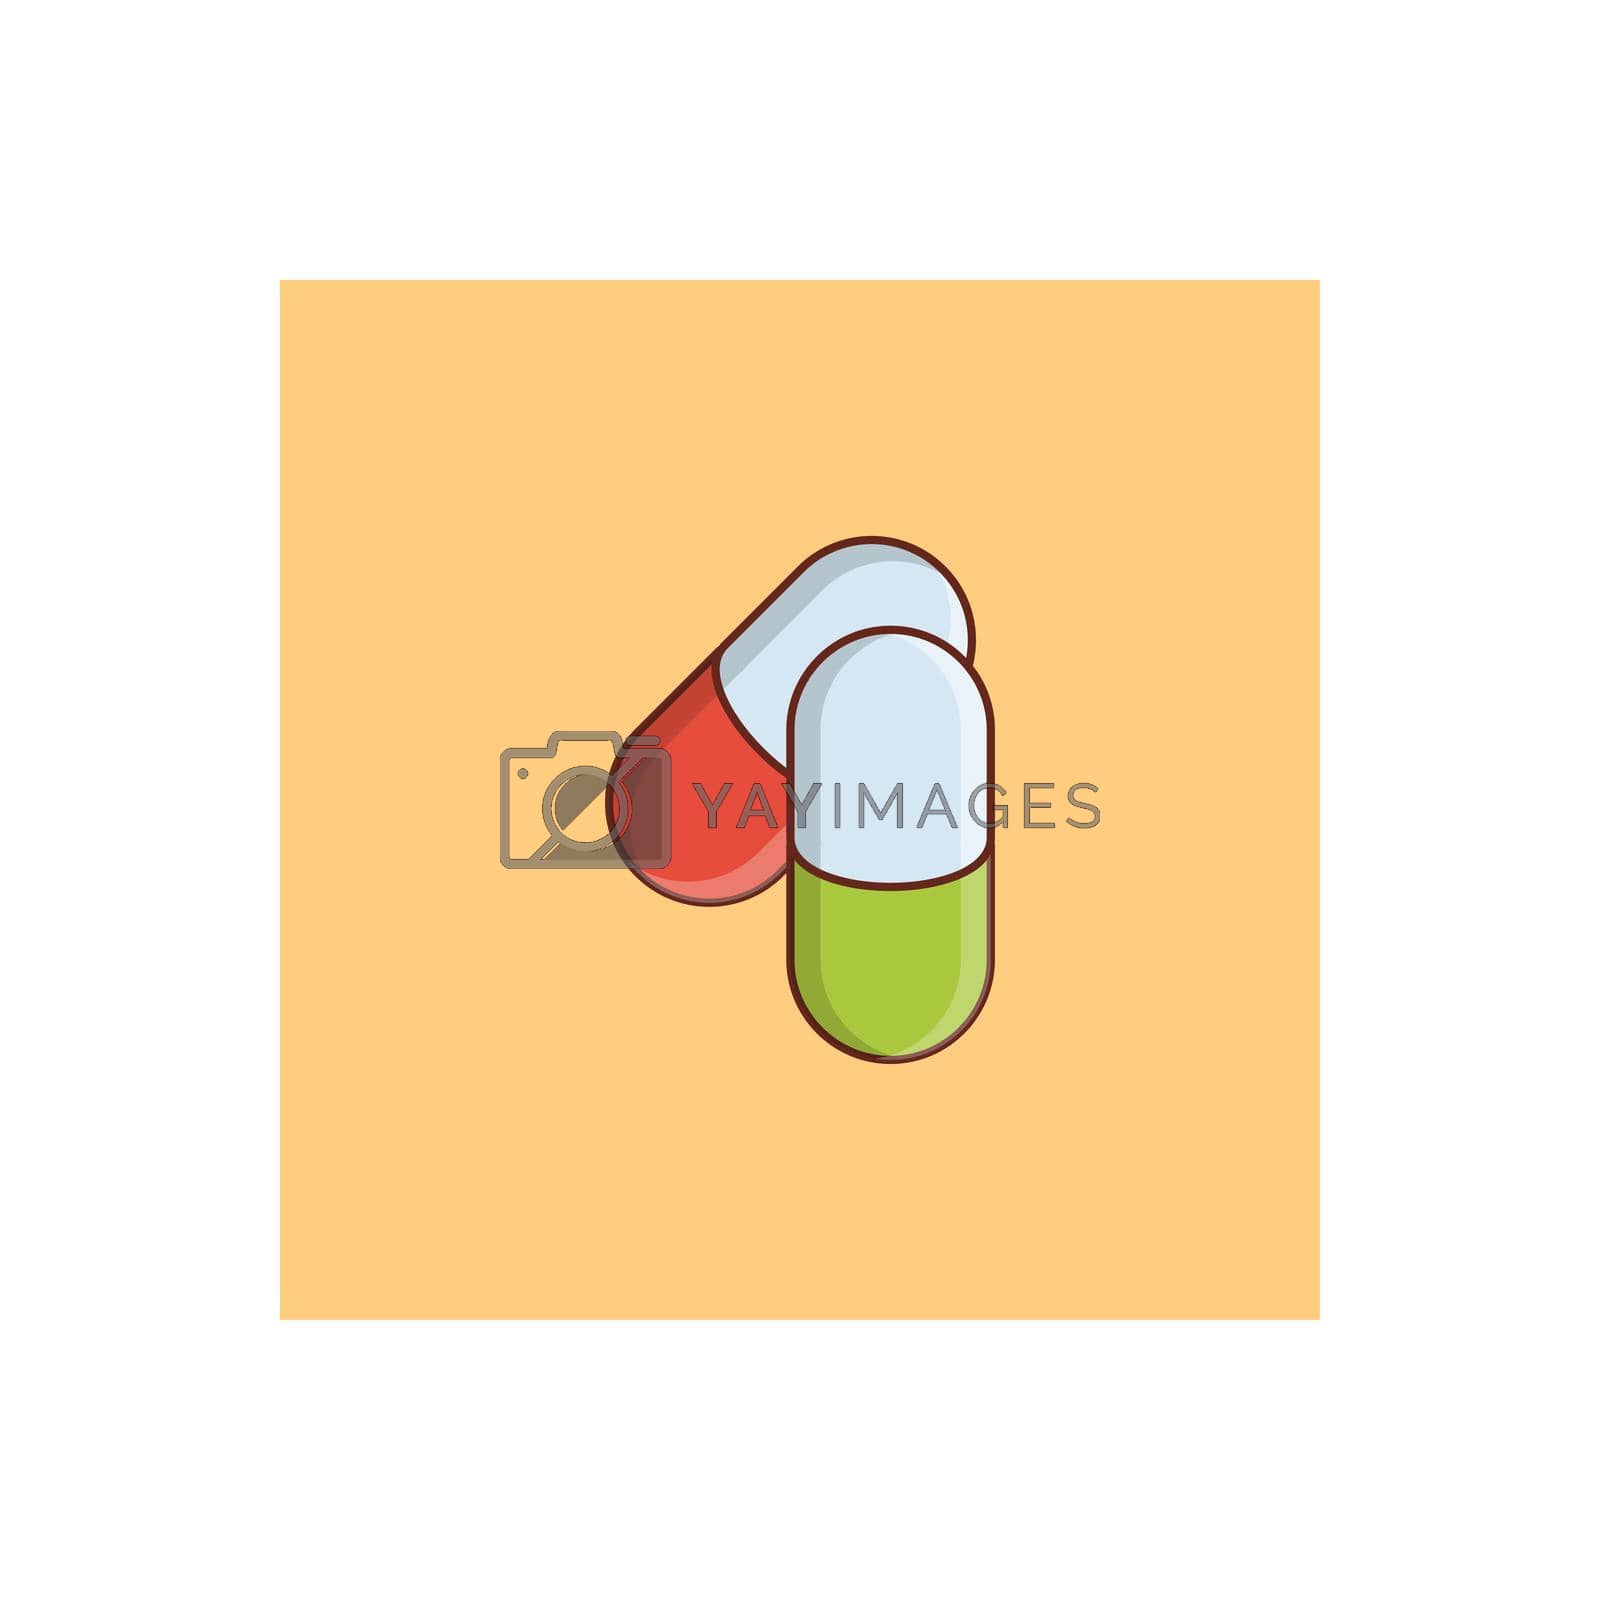 Royalty free image of drugs by FlaticonsDesign